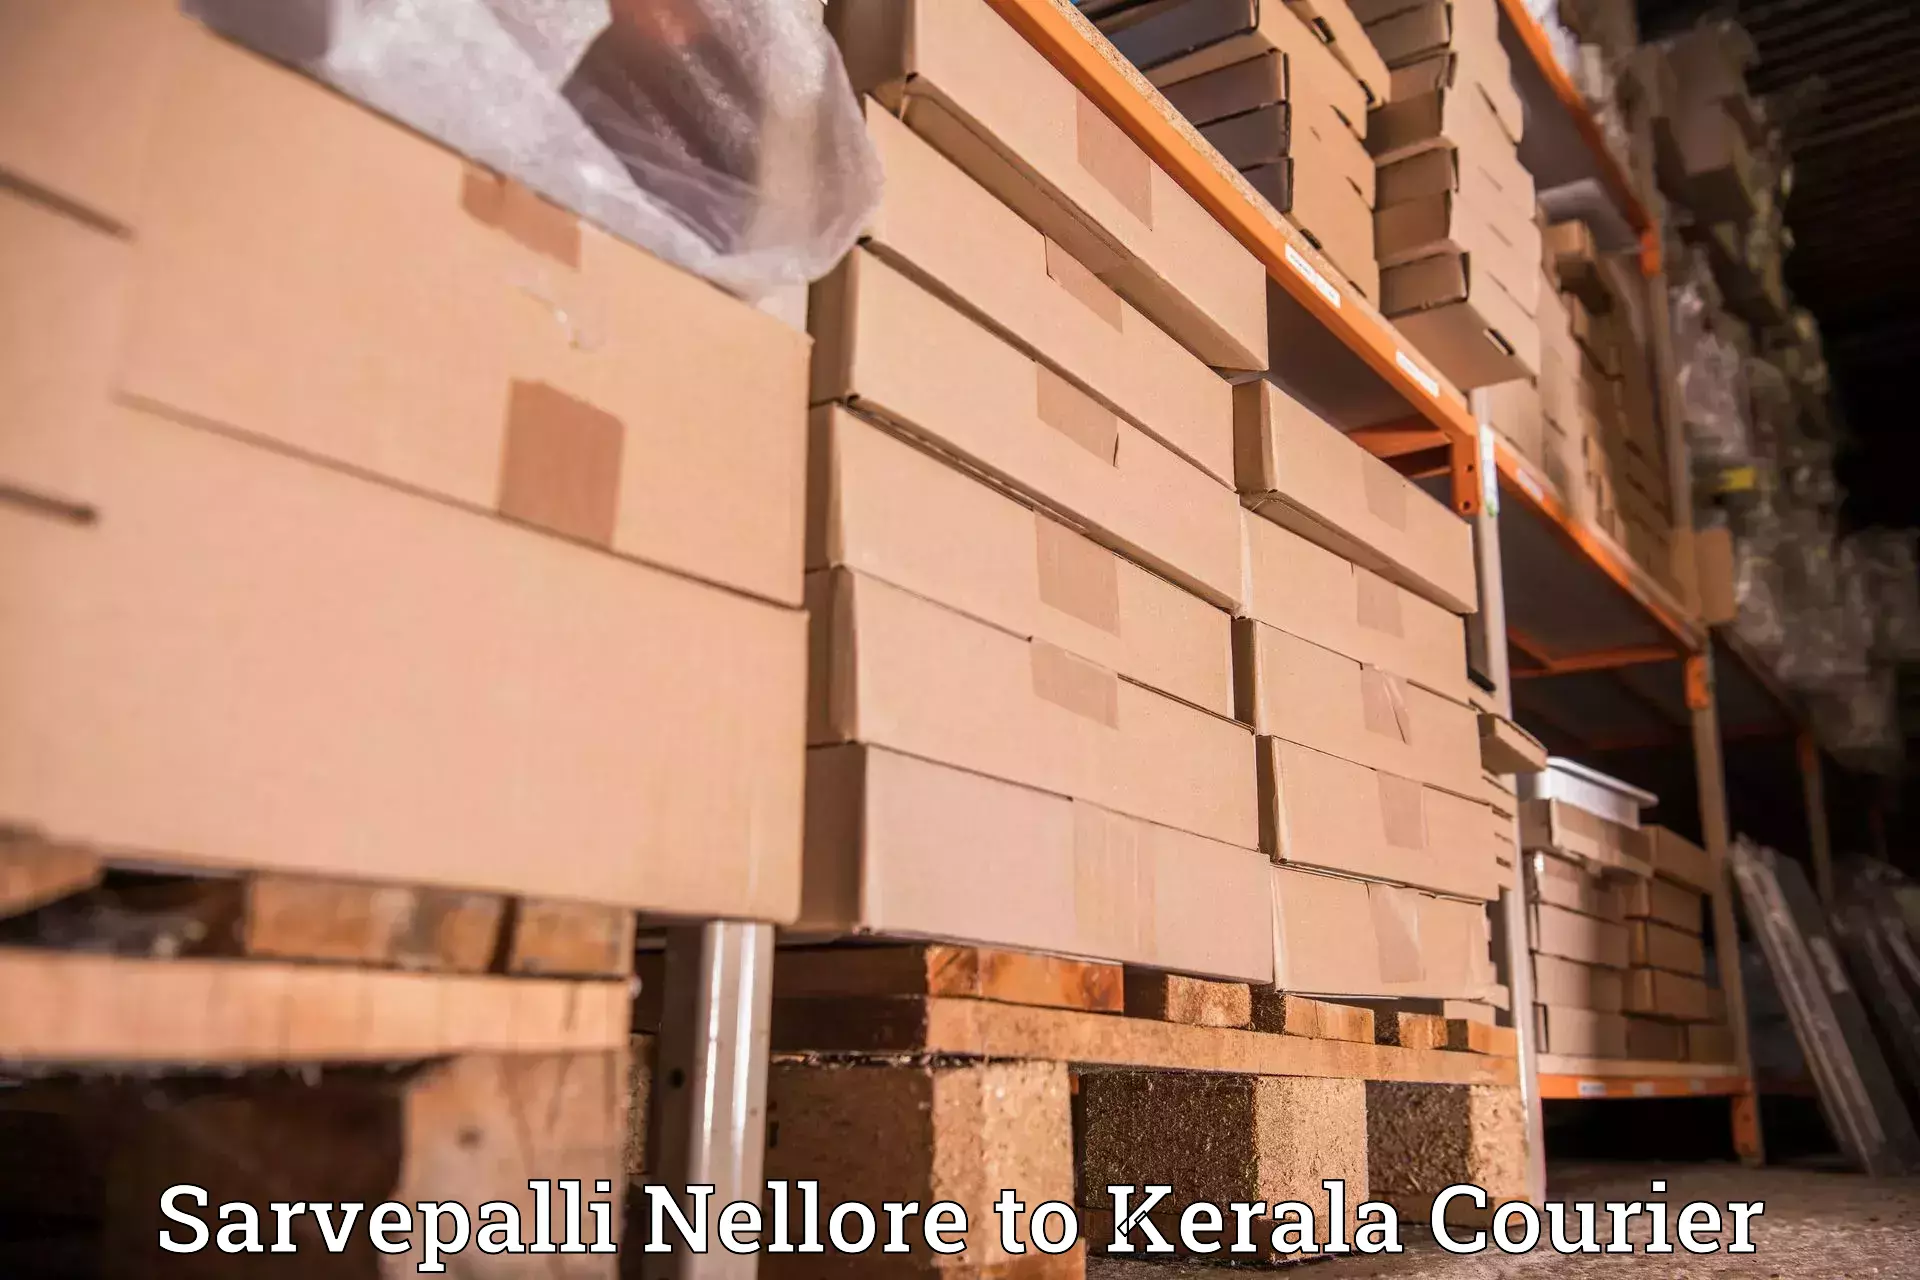 Subscription-based courier Sarvepalli Nellore to Cochin University of Science and Technology